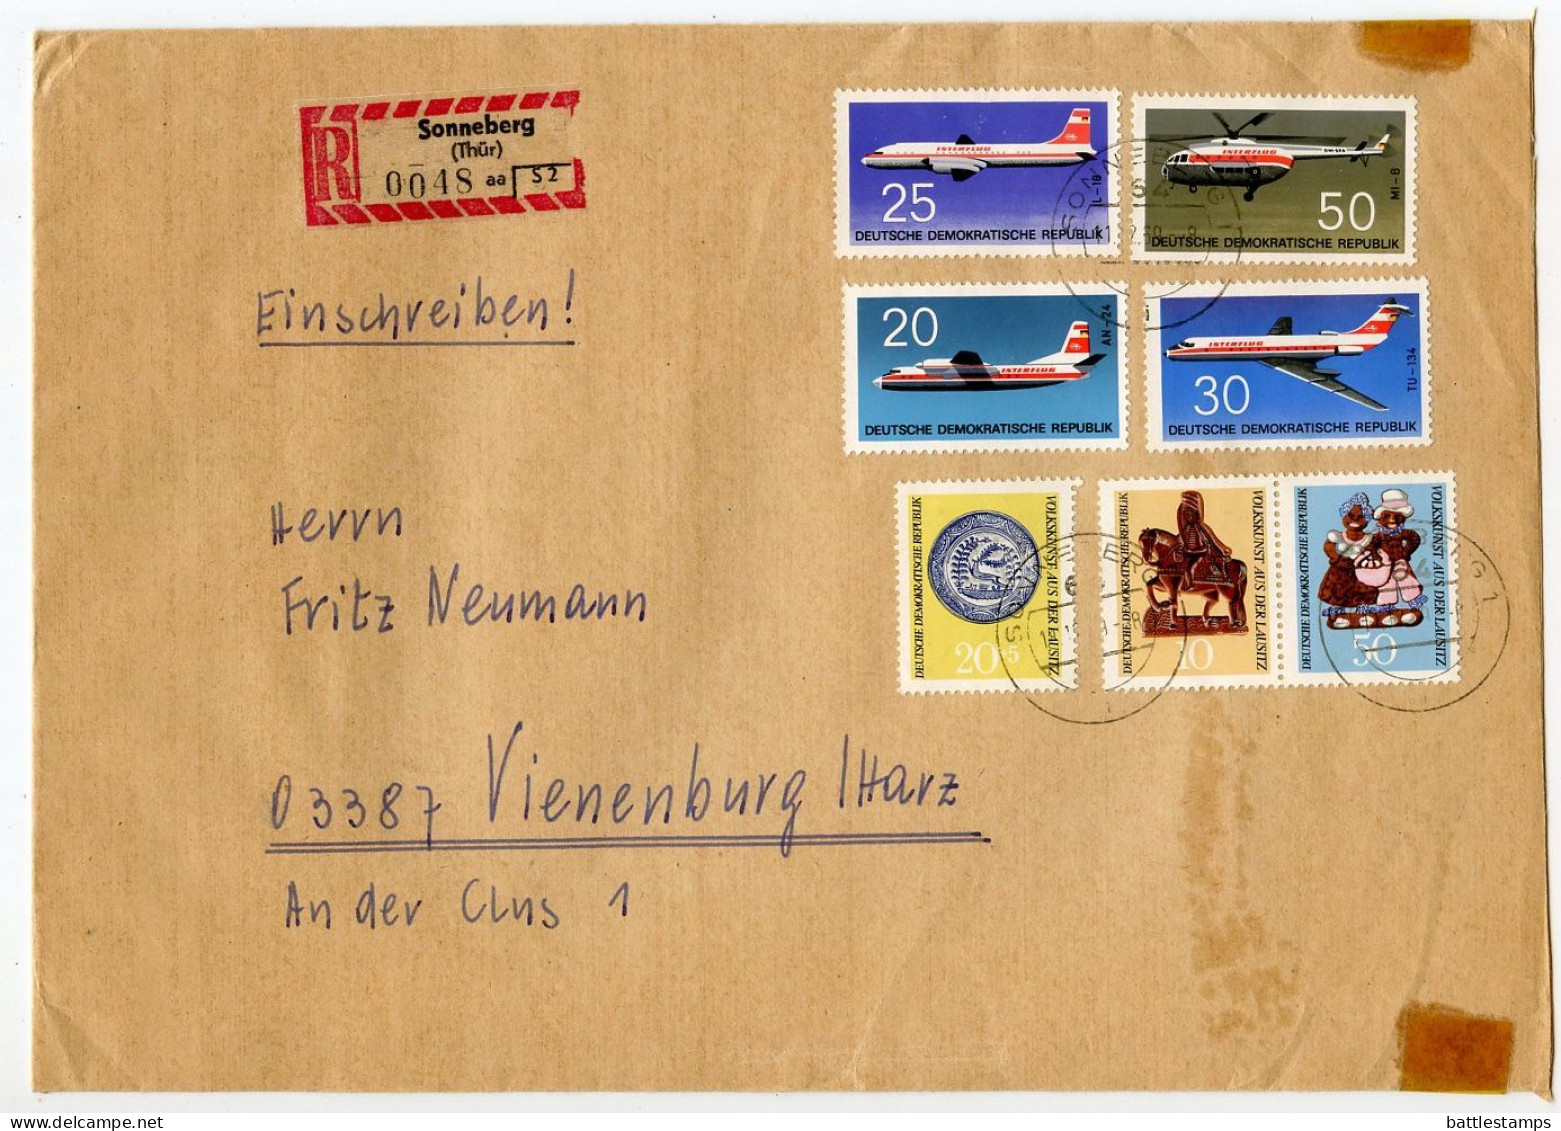 Germany, East 1969 Registered Cover; Sonneberg To Vienenburg; Folk Art & Aviation Stamps - Airplanes & Helicopter - Covers & Documents